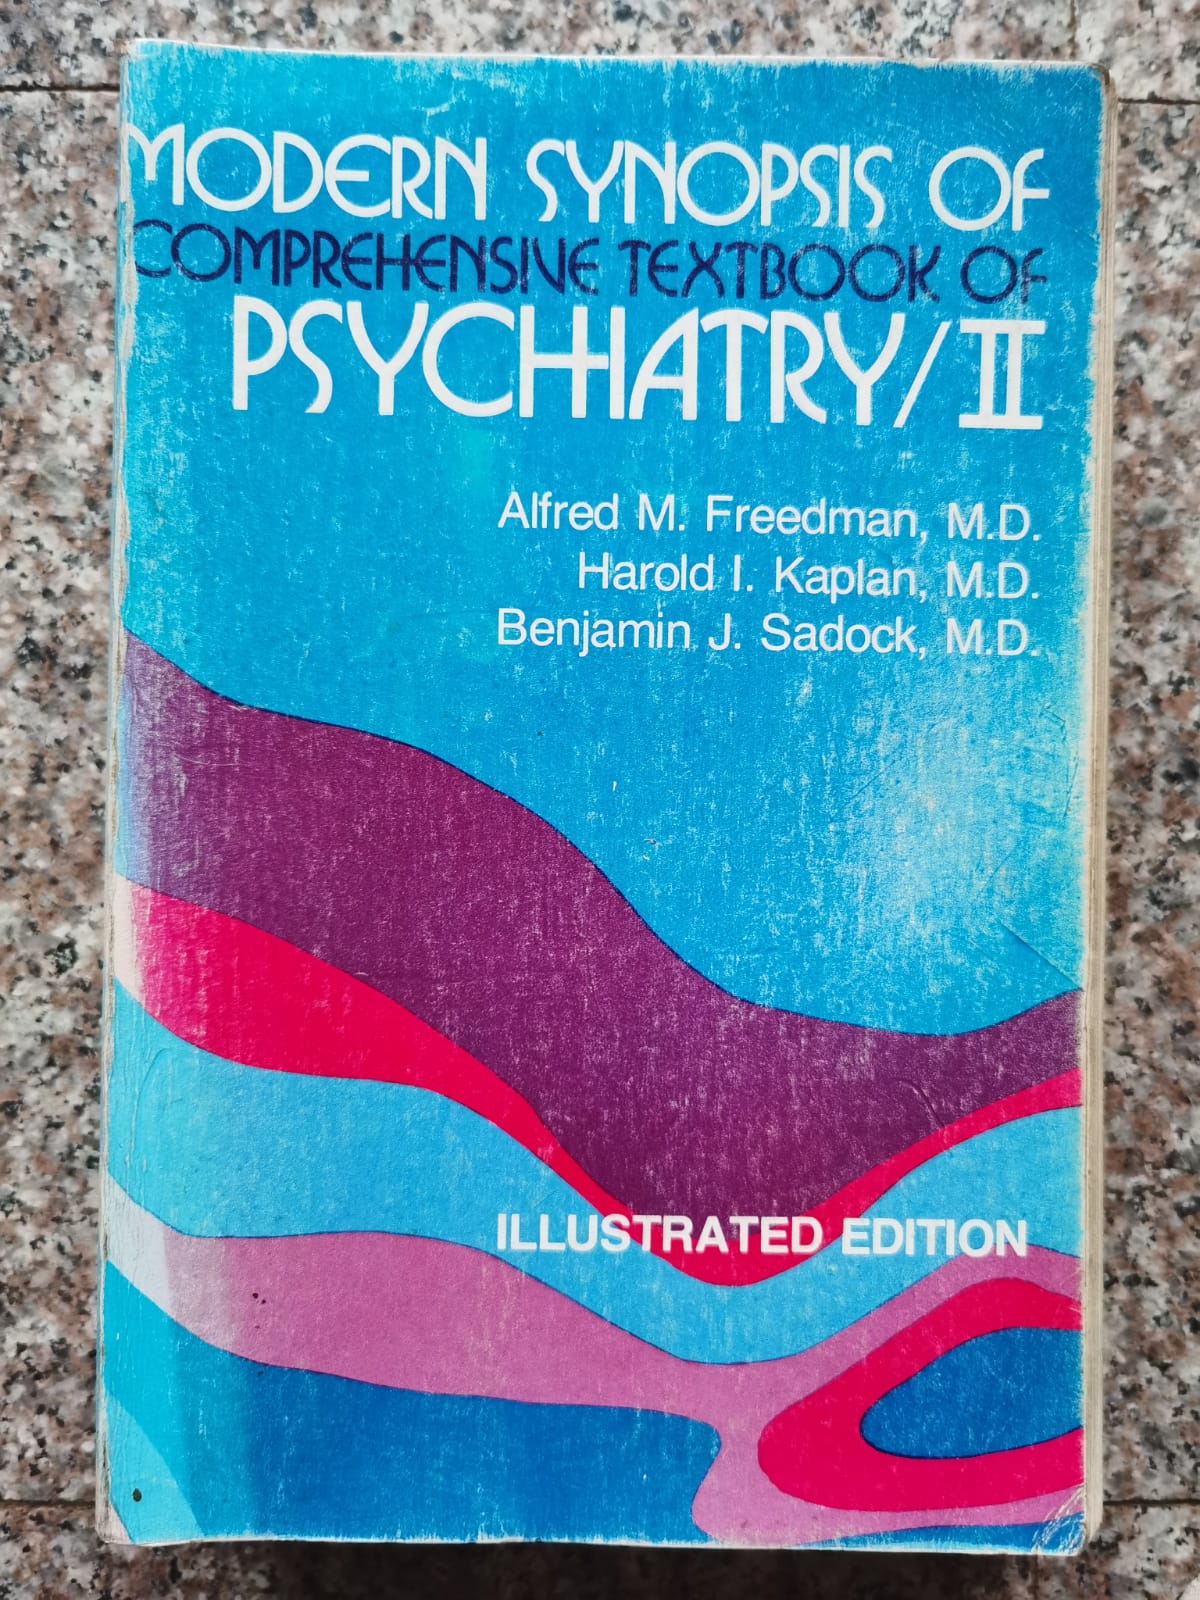 modern synopsis of comprehesive textbook of psychiatry (second edition)                              alfred m. freedman                                                                                  